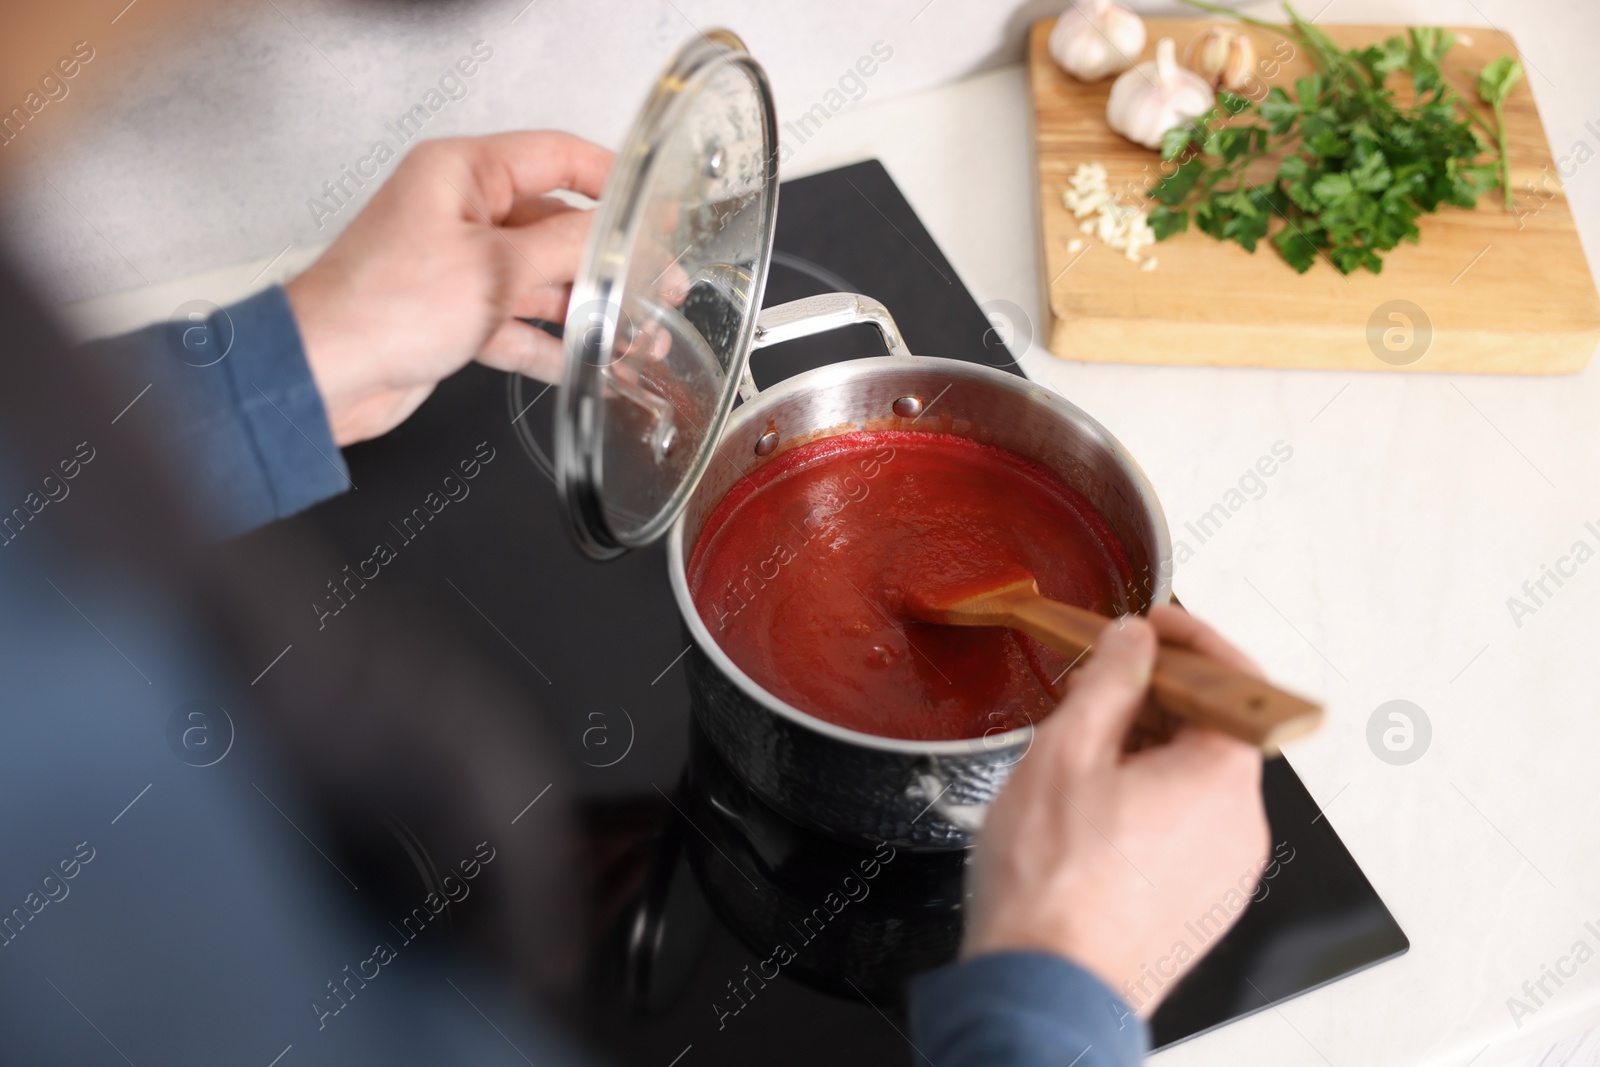 Photo of Man cooking tomato soup on cooktop, above view